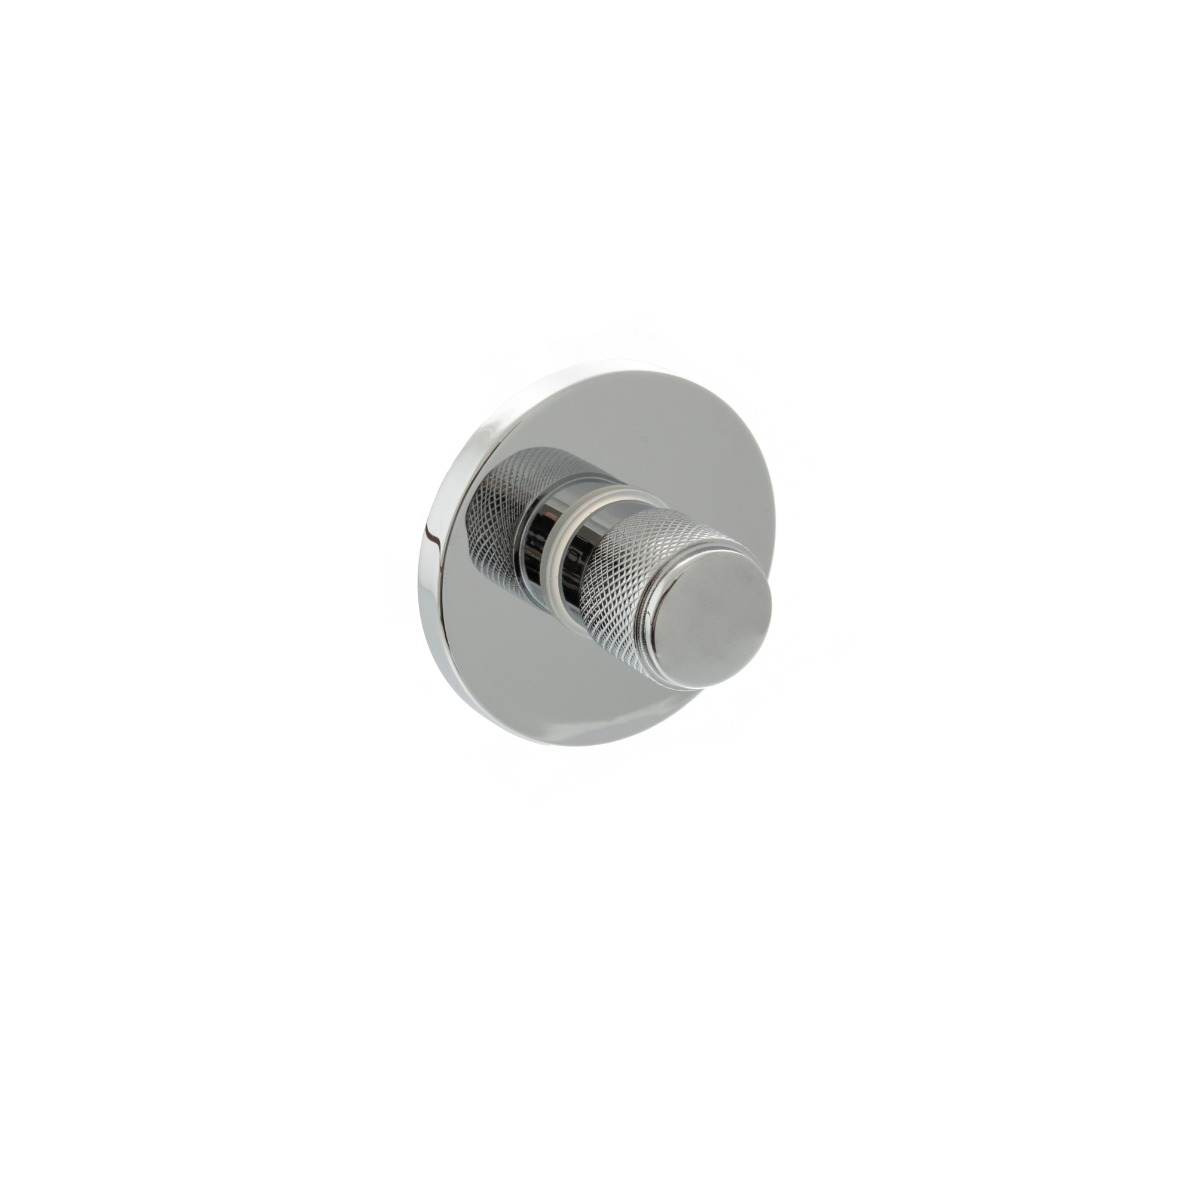 Millhouse Brass Knurled WC Turn and Release on 5mm Slimline Round Rose - Polished Chrome MHSRKWCPC